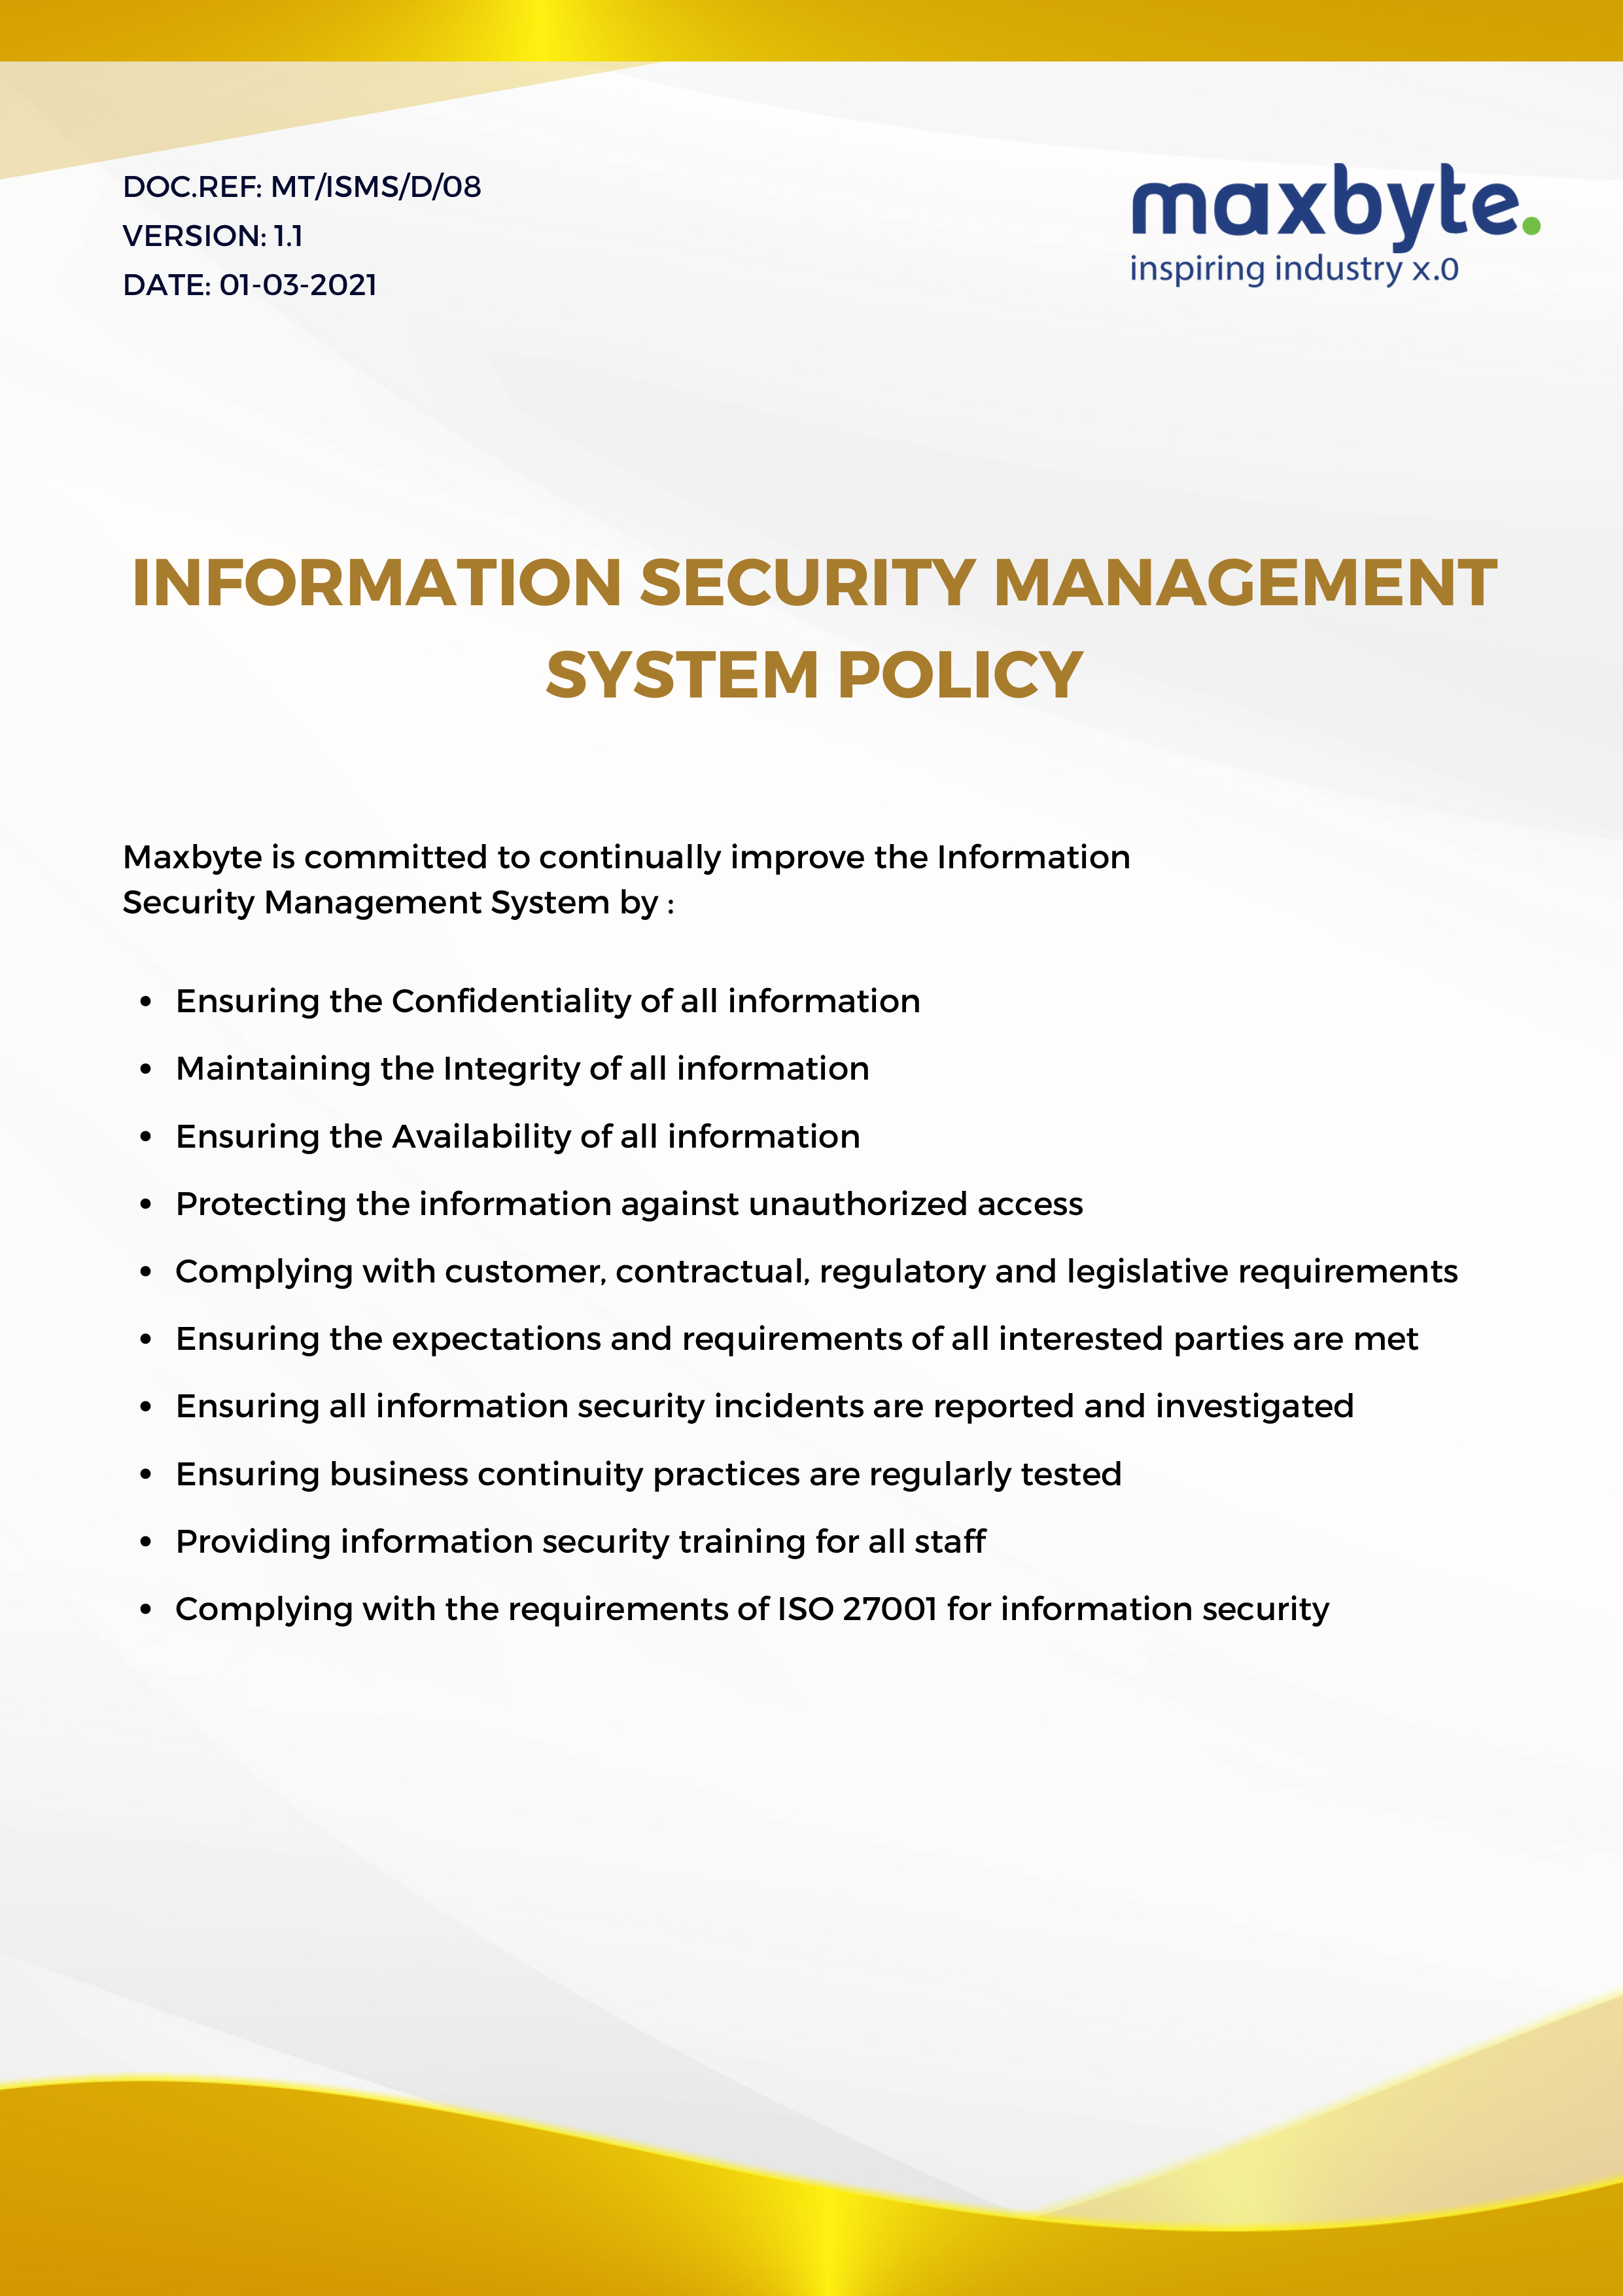 Maxbyte Certified on Information Security Management System Policy - ISMS